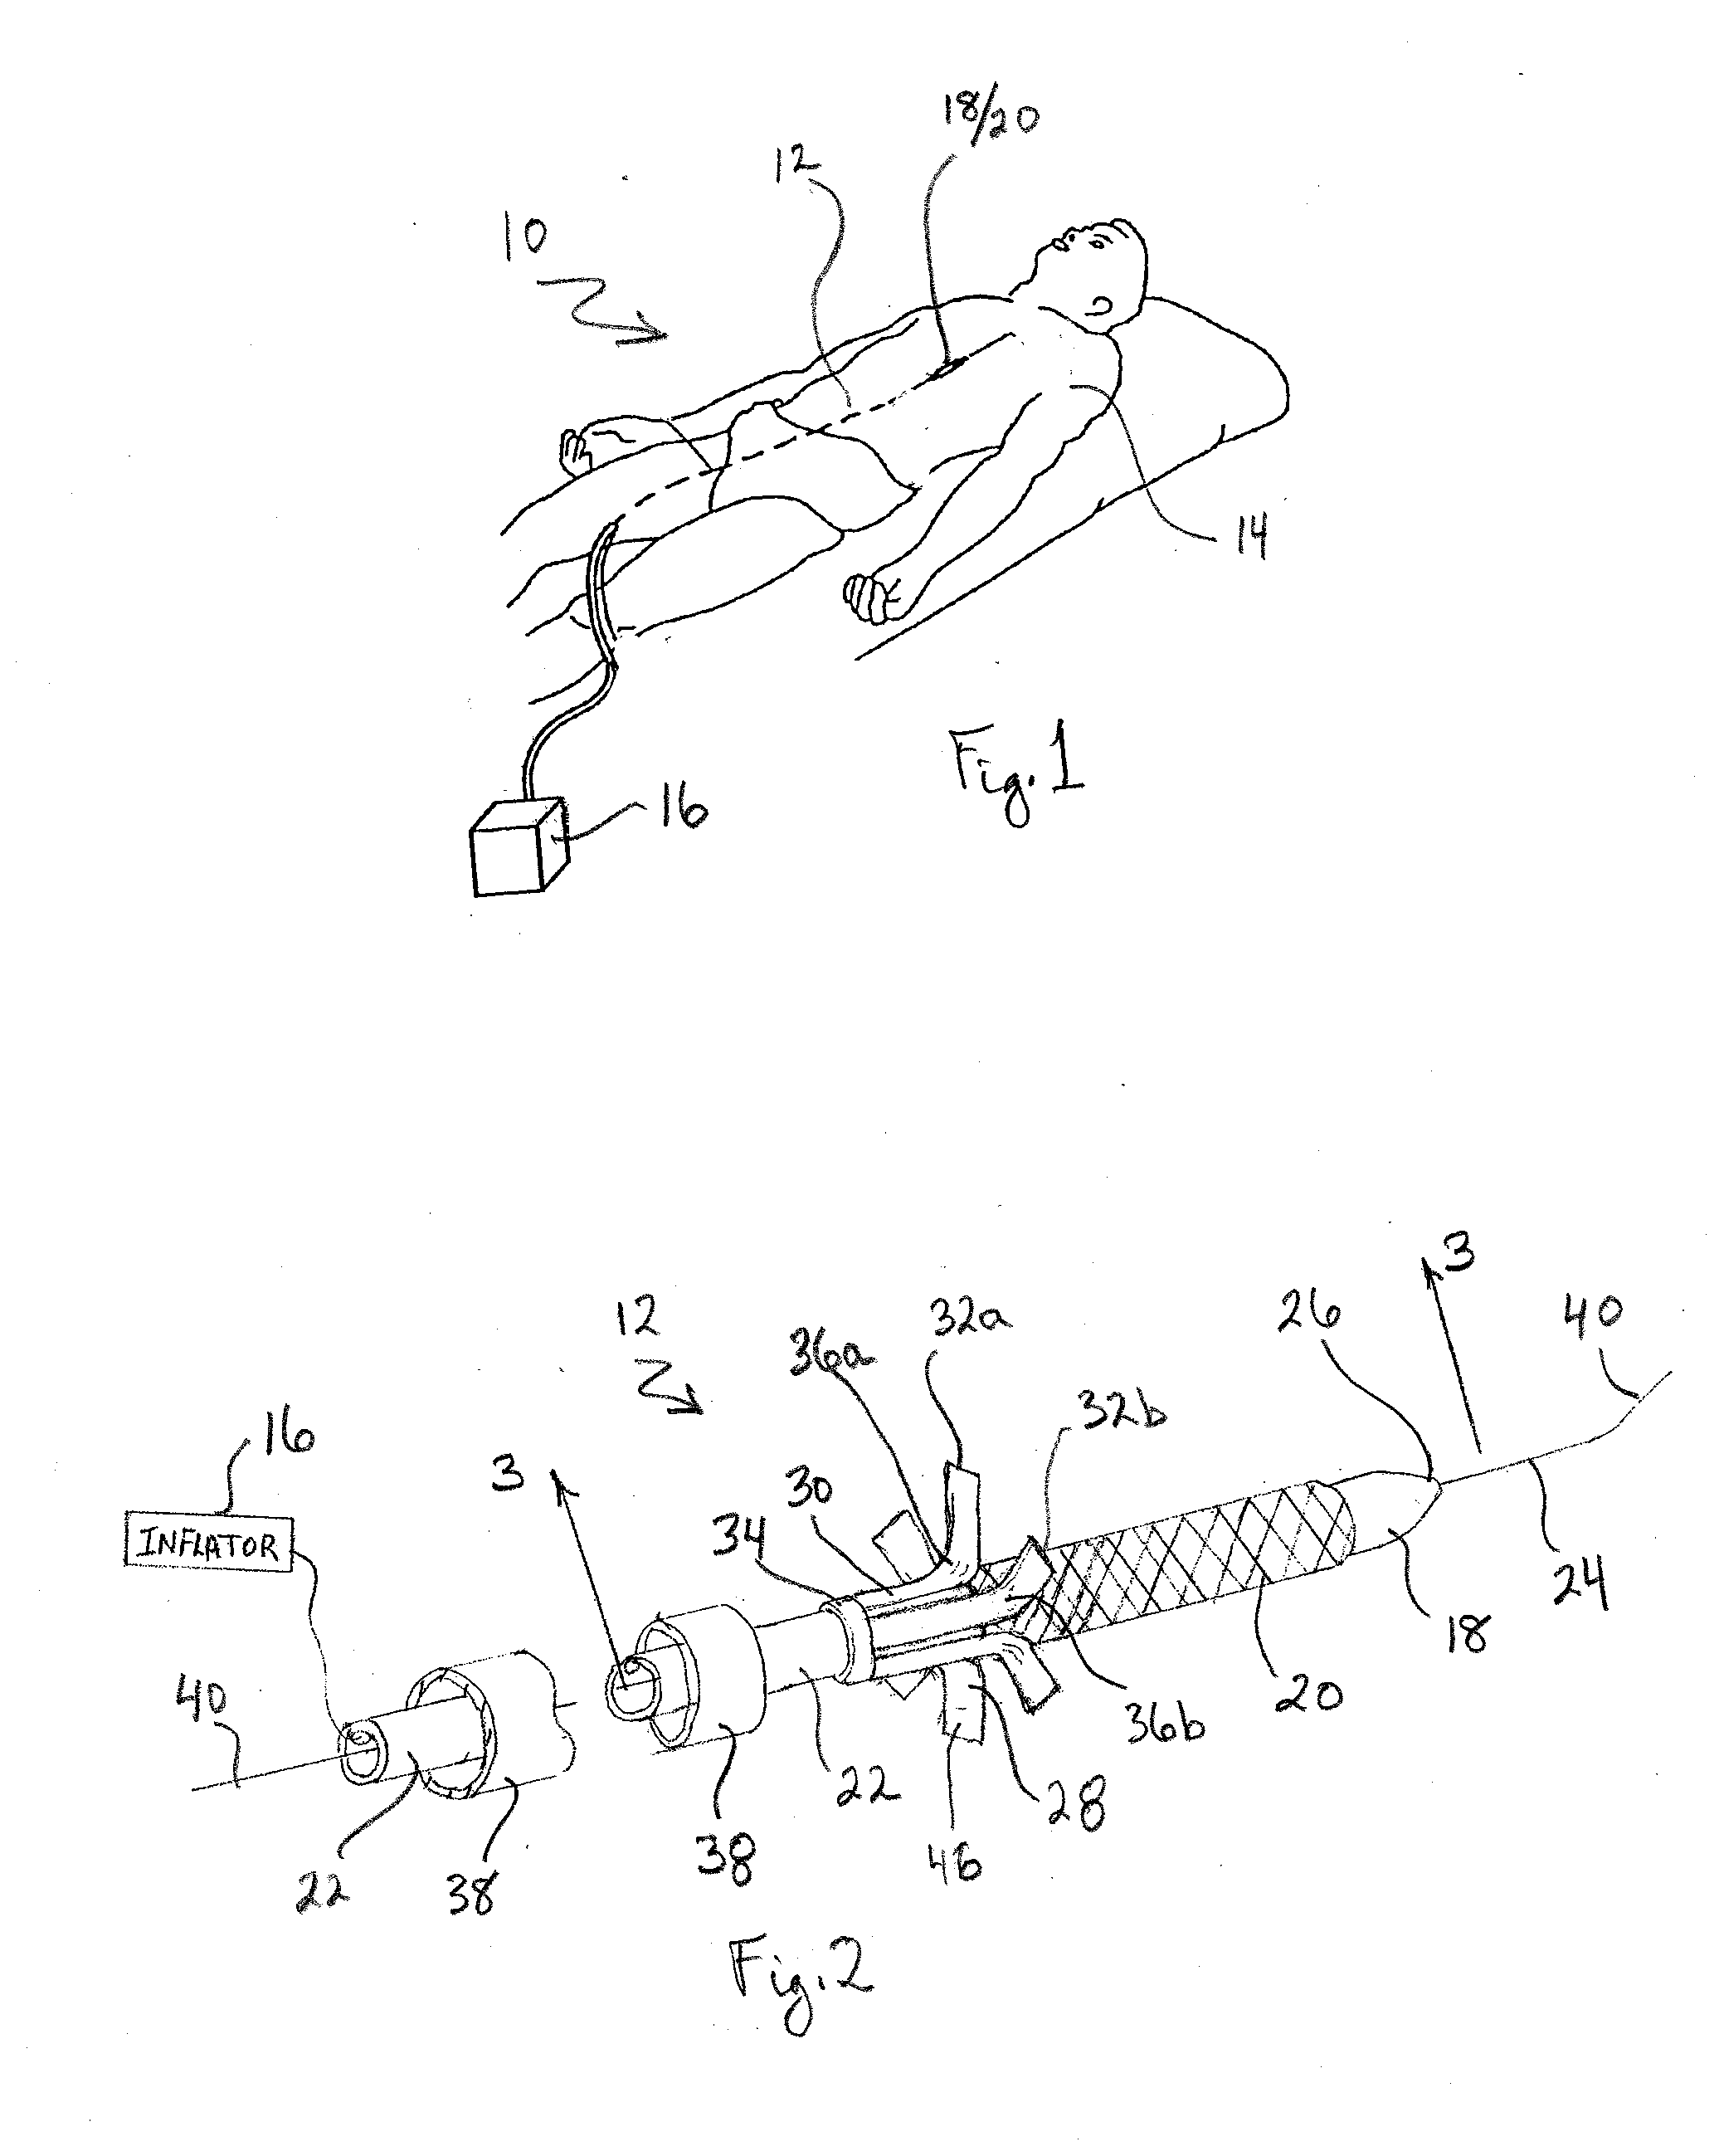 System and Method for Placing a Coronary Stent at the Ostium of a Blood Vessel